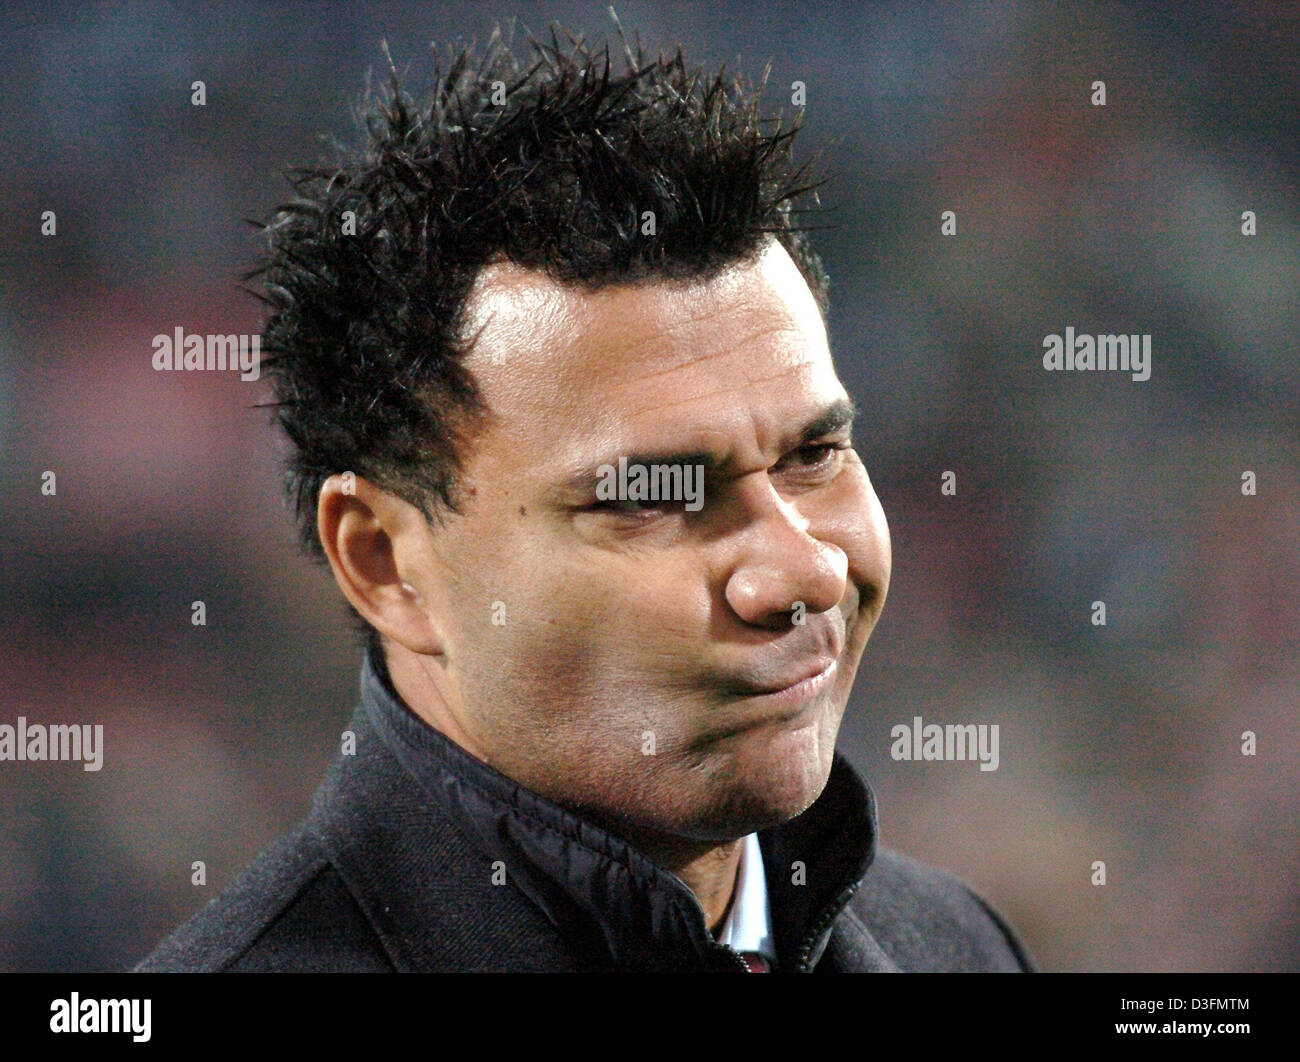 (dpa) - Rotterdam head coach Ruud Gullit makes a face during the UEFA Cup match between Dutch club Feyenoord Rotterdam and German side FC Schalke 04 at De Kuip Stadium in Rotterdam, the Netherlands, 1 December 2004. Rotterdam won the match 2-1 but both clubs managed to qualify for the last 32 of the UEFA Cup. Stock Photo